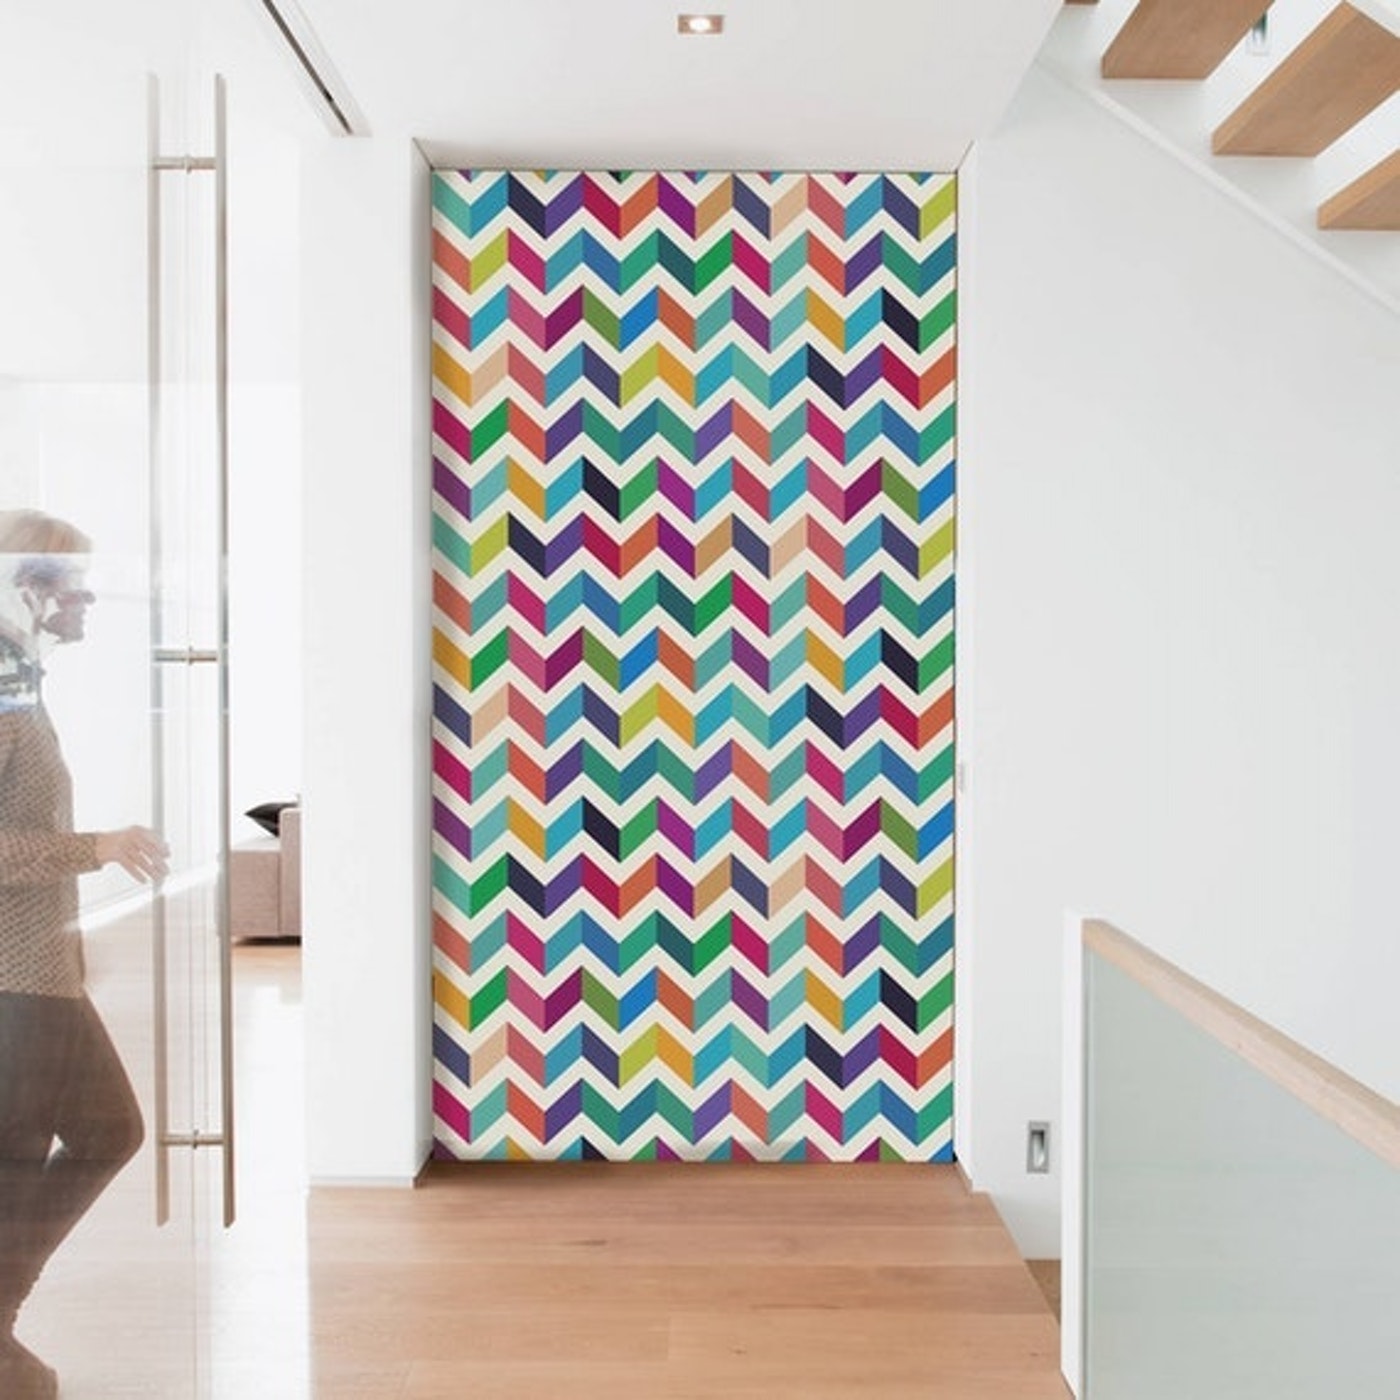 Papel Mural / Candy Zig-Zag